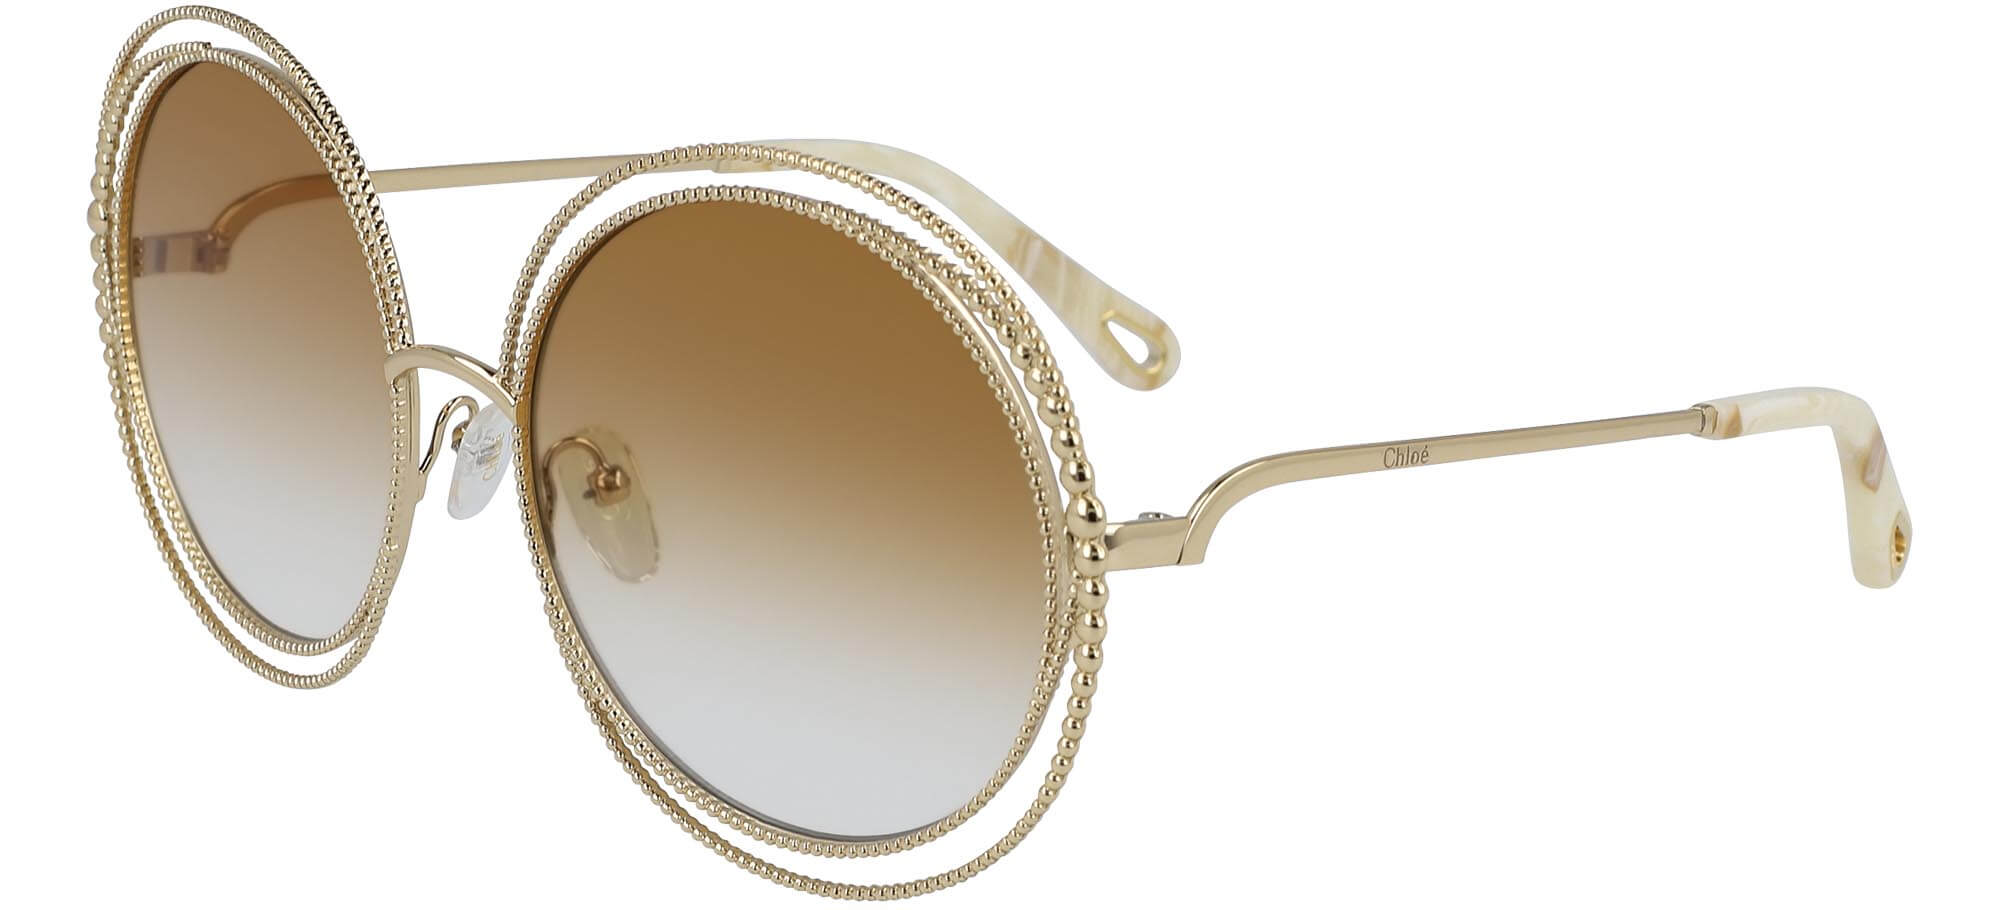 ChloéCARLINA CHAIN CE114SCGold/light Brown Shaded (837)